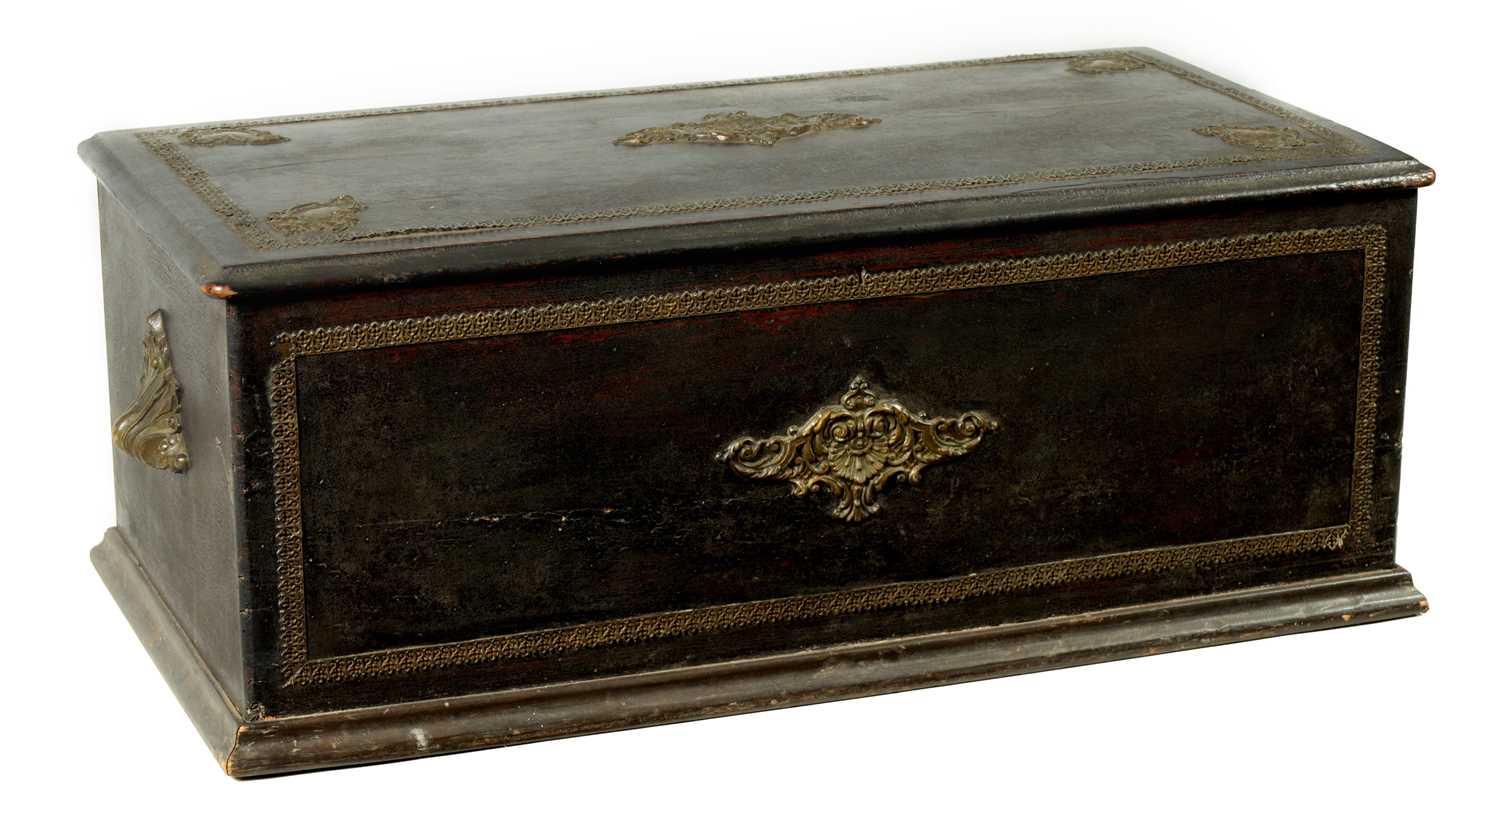 A VERY LARGE LATE 19TH CENTURY SWISS ORCHESTRAL MUSIC BOX - Image 3 of 11